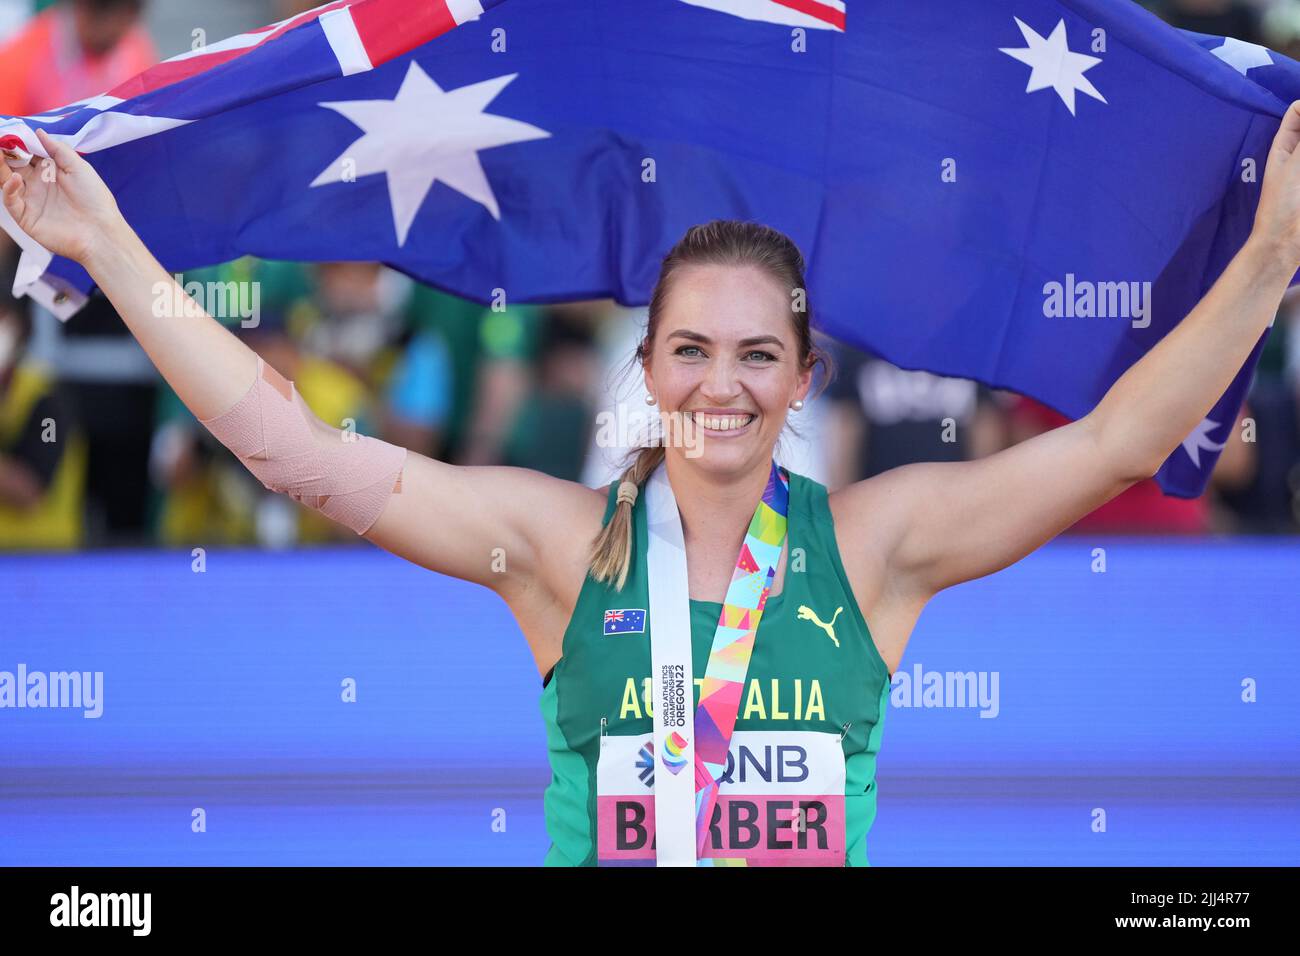 Eugene, USA. 22nd July, 2022. Kelsey-Lee Barber of Australia celebrates after the women's javelin throw final at the World Athletics Championships Oregon22 in Eugene, Oregon, the United States, July 22, 2022. Credit: Wu Xiaoling/Xinhua/Alamy Live News Stock Photo